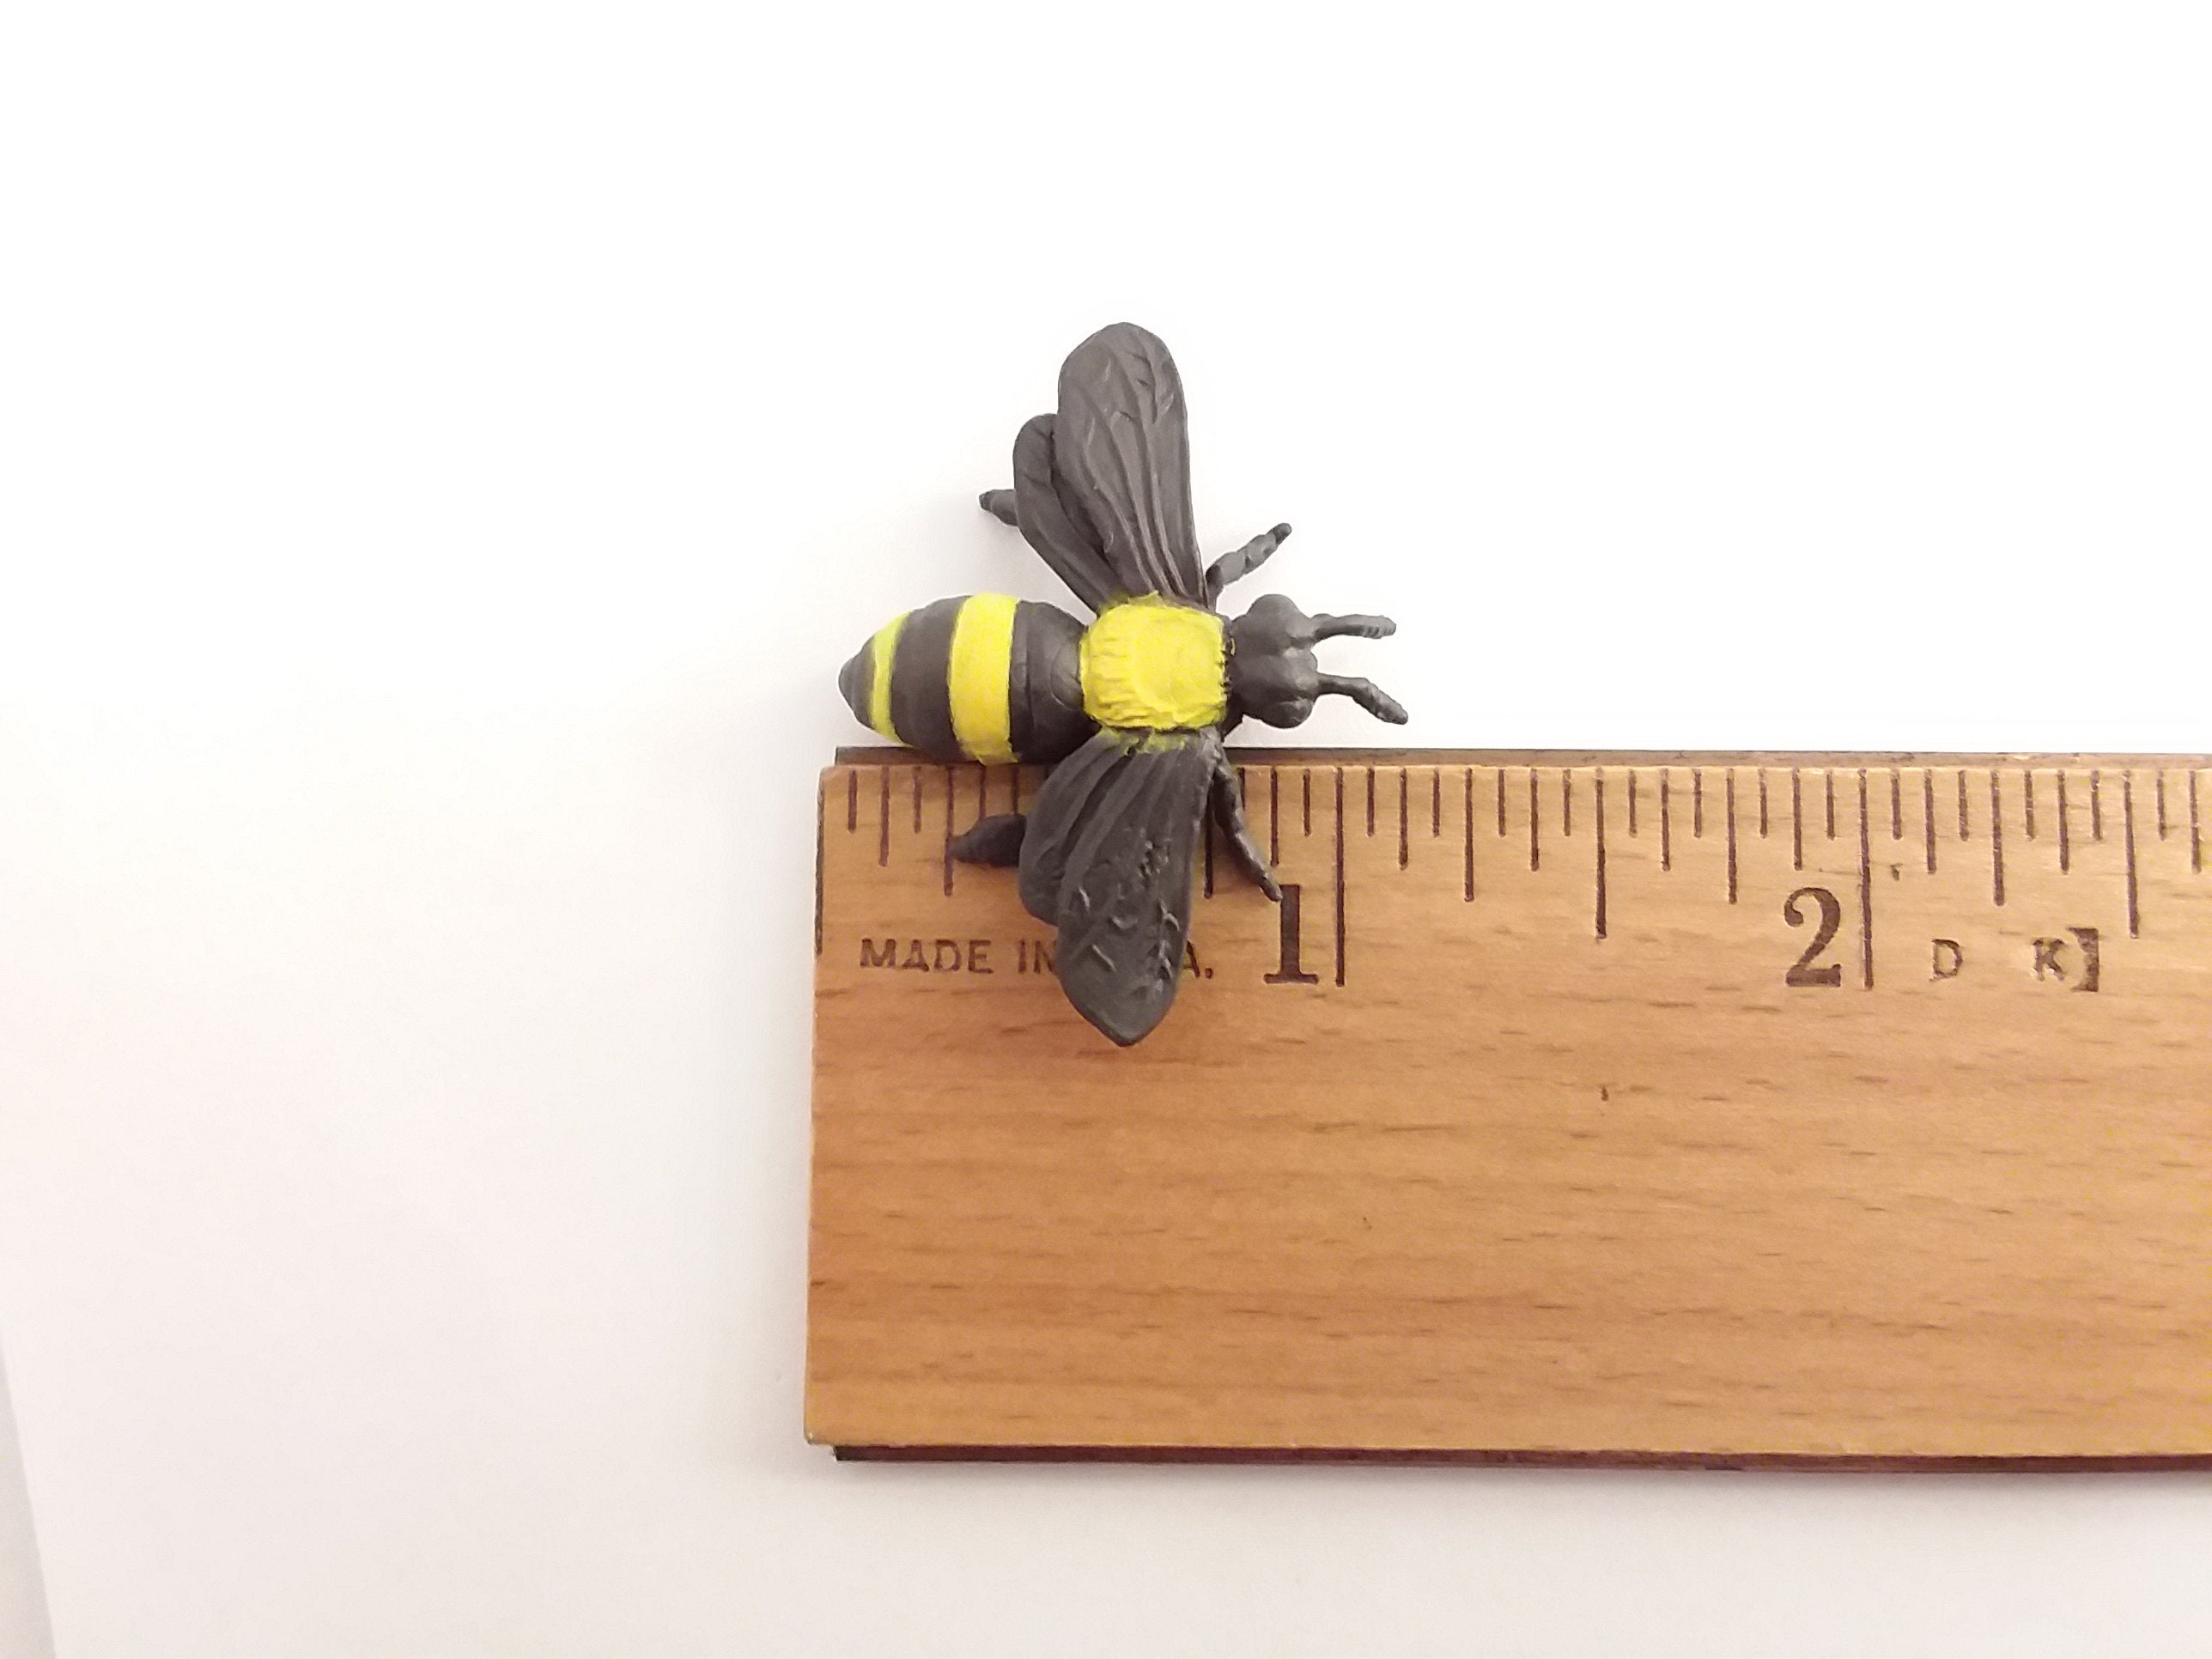 Bee Figurine Soft Plastic Honeybee for Fairy Garden, Diorama, or Terrarium  Realistic Insect Life Size Bug Toy Large Honey Bee Figure 